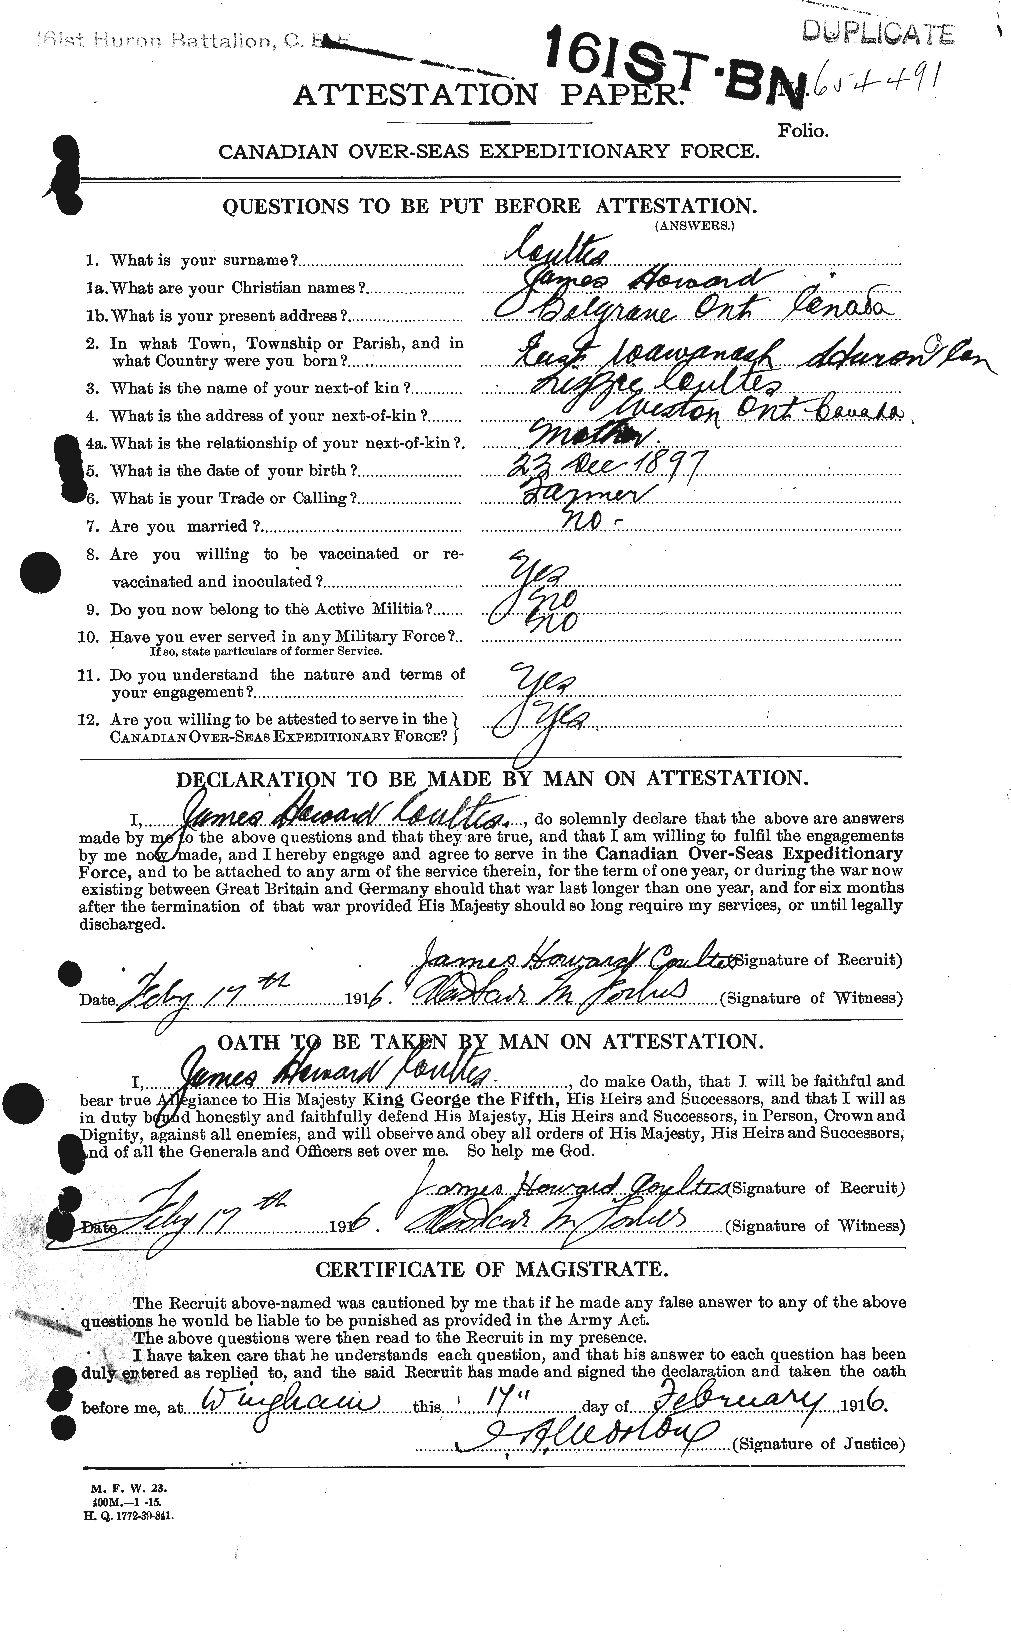 Personnel Records of the First World War - CEF 058113a